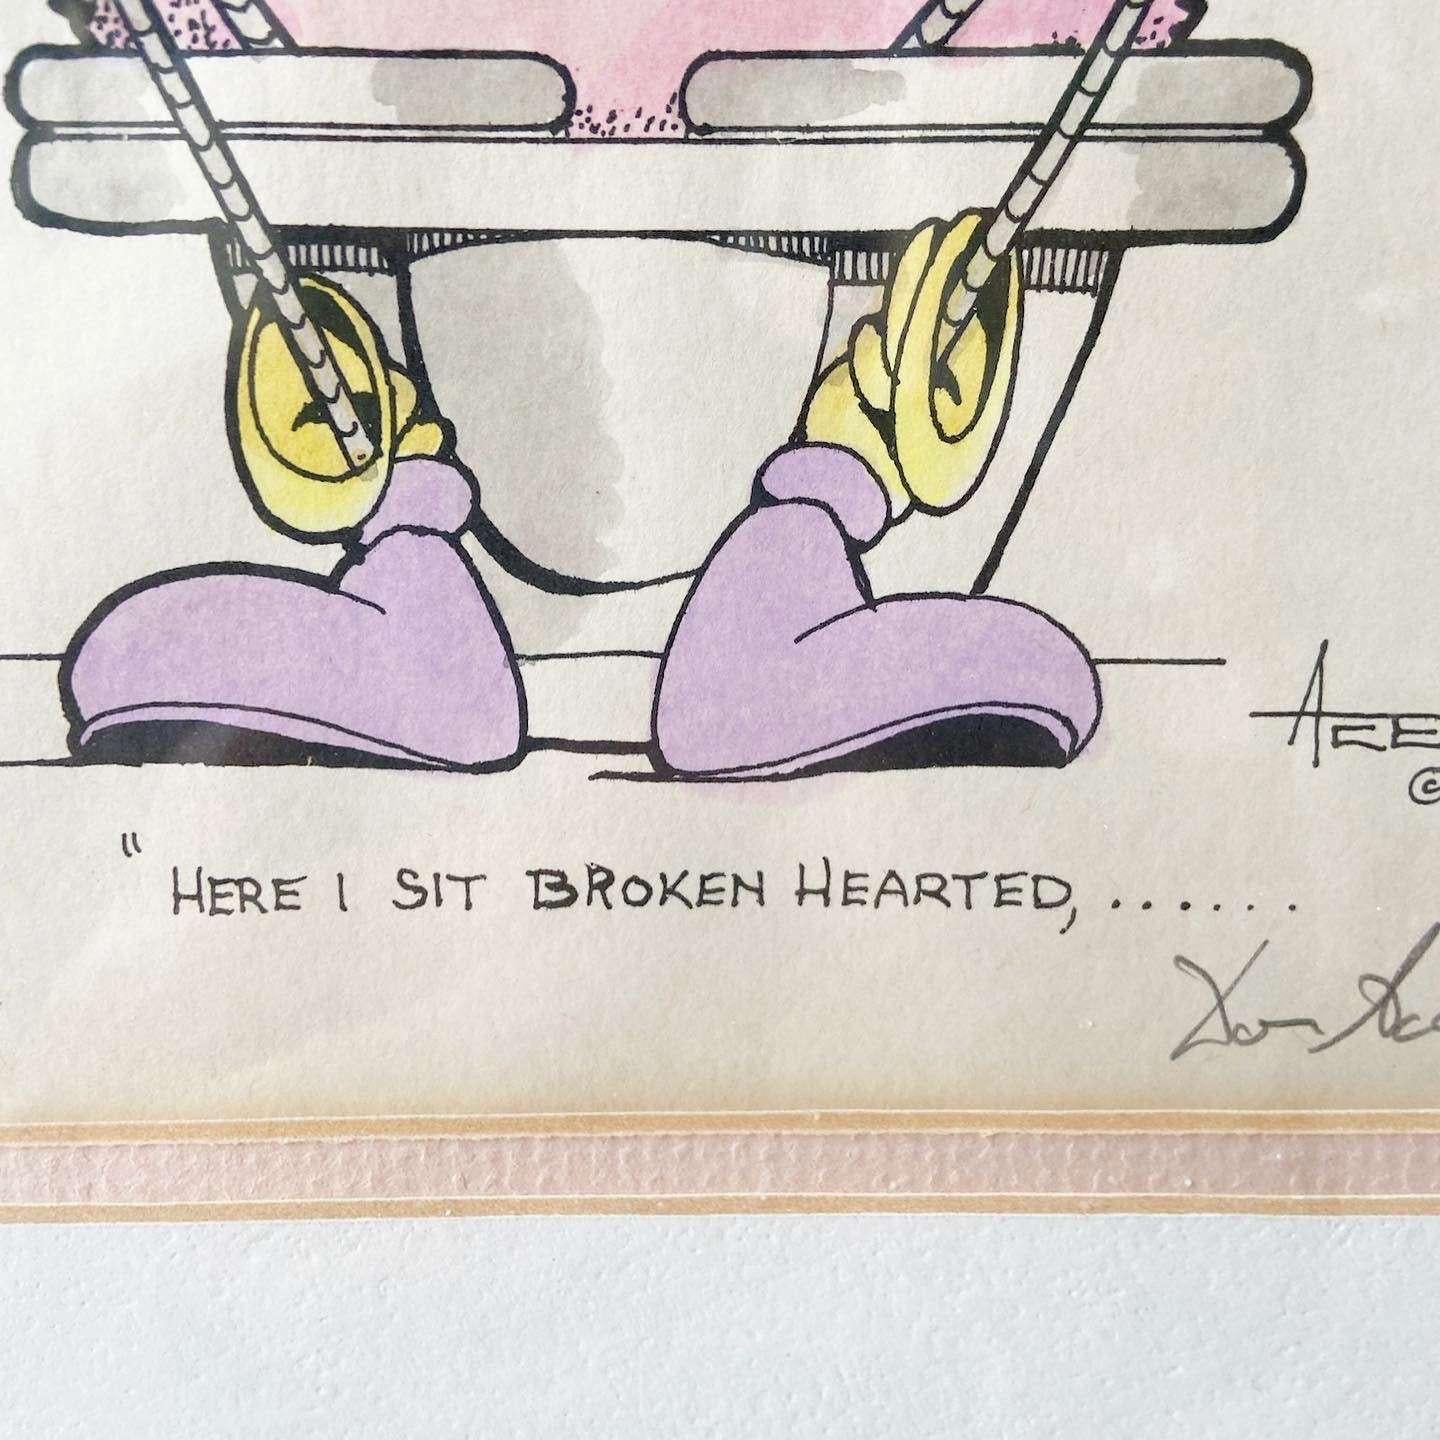 American Framed and Singed Print “Broken Hearted” by Don Aceto For Sale